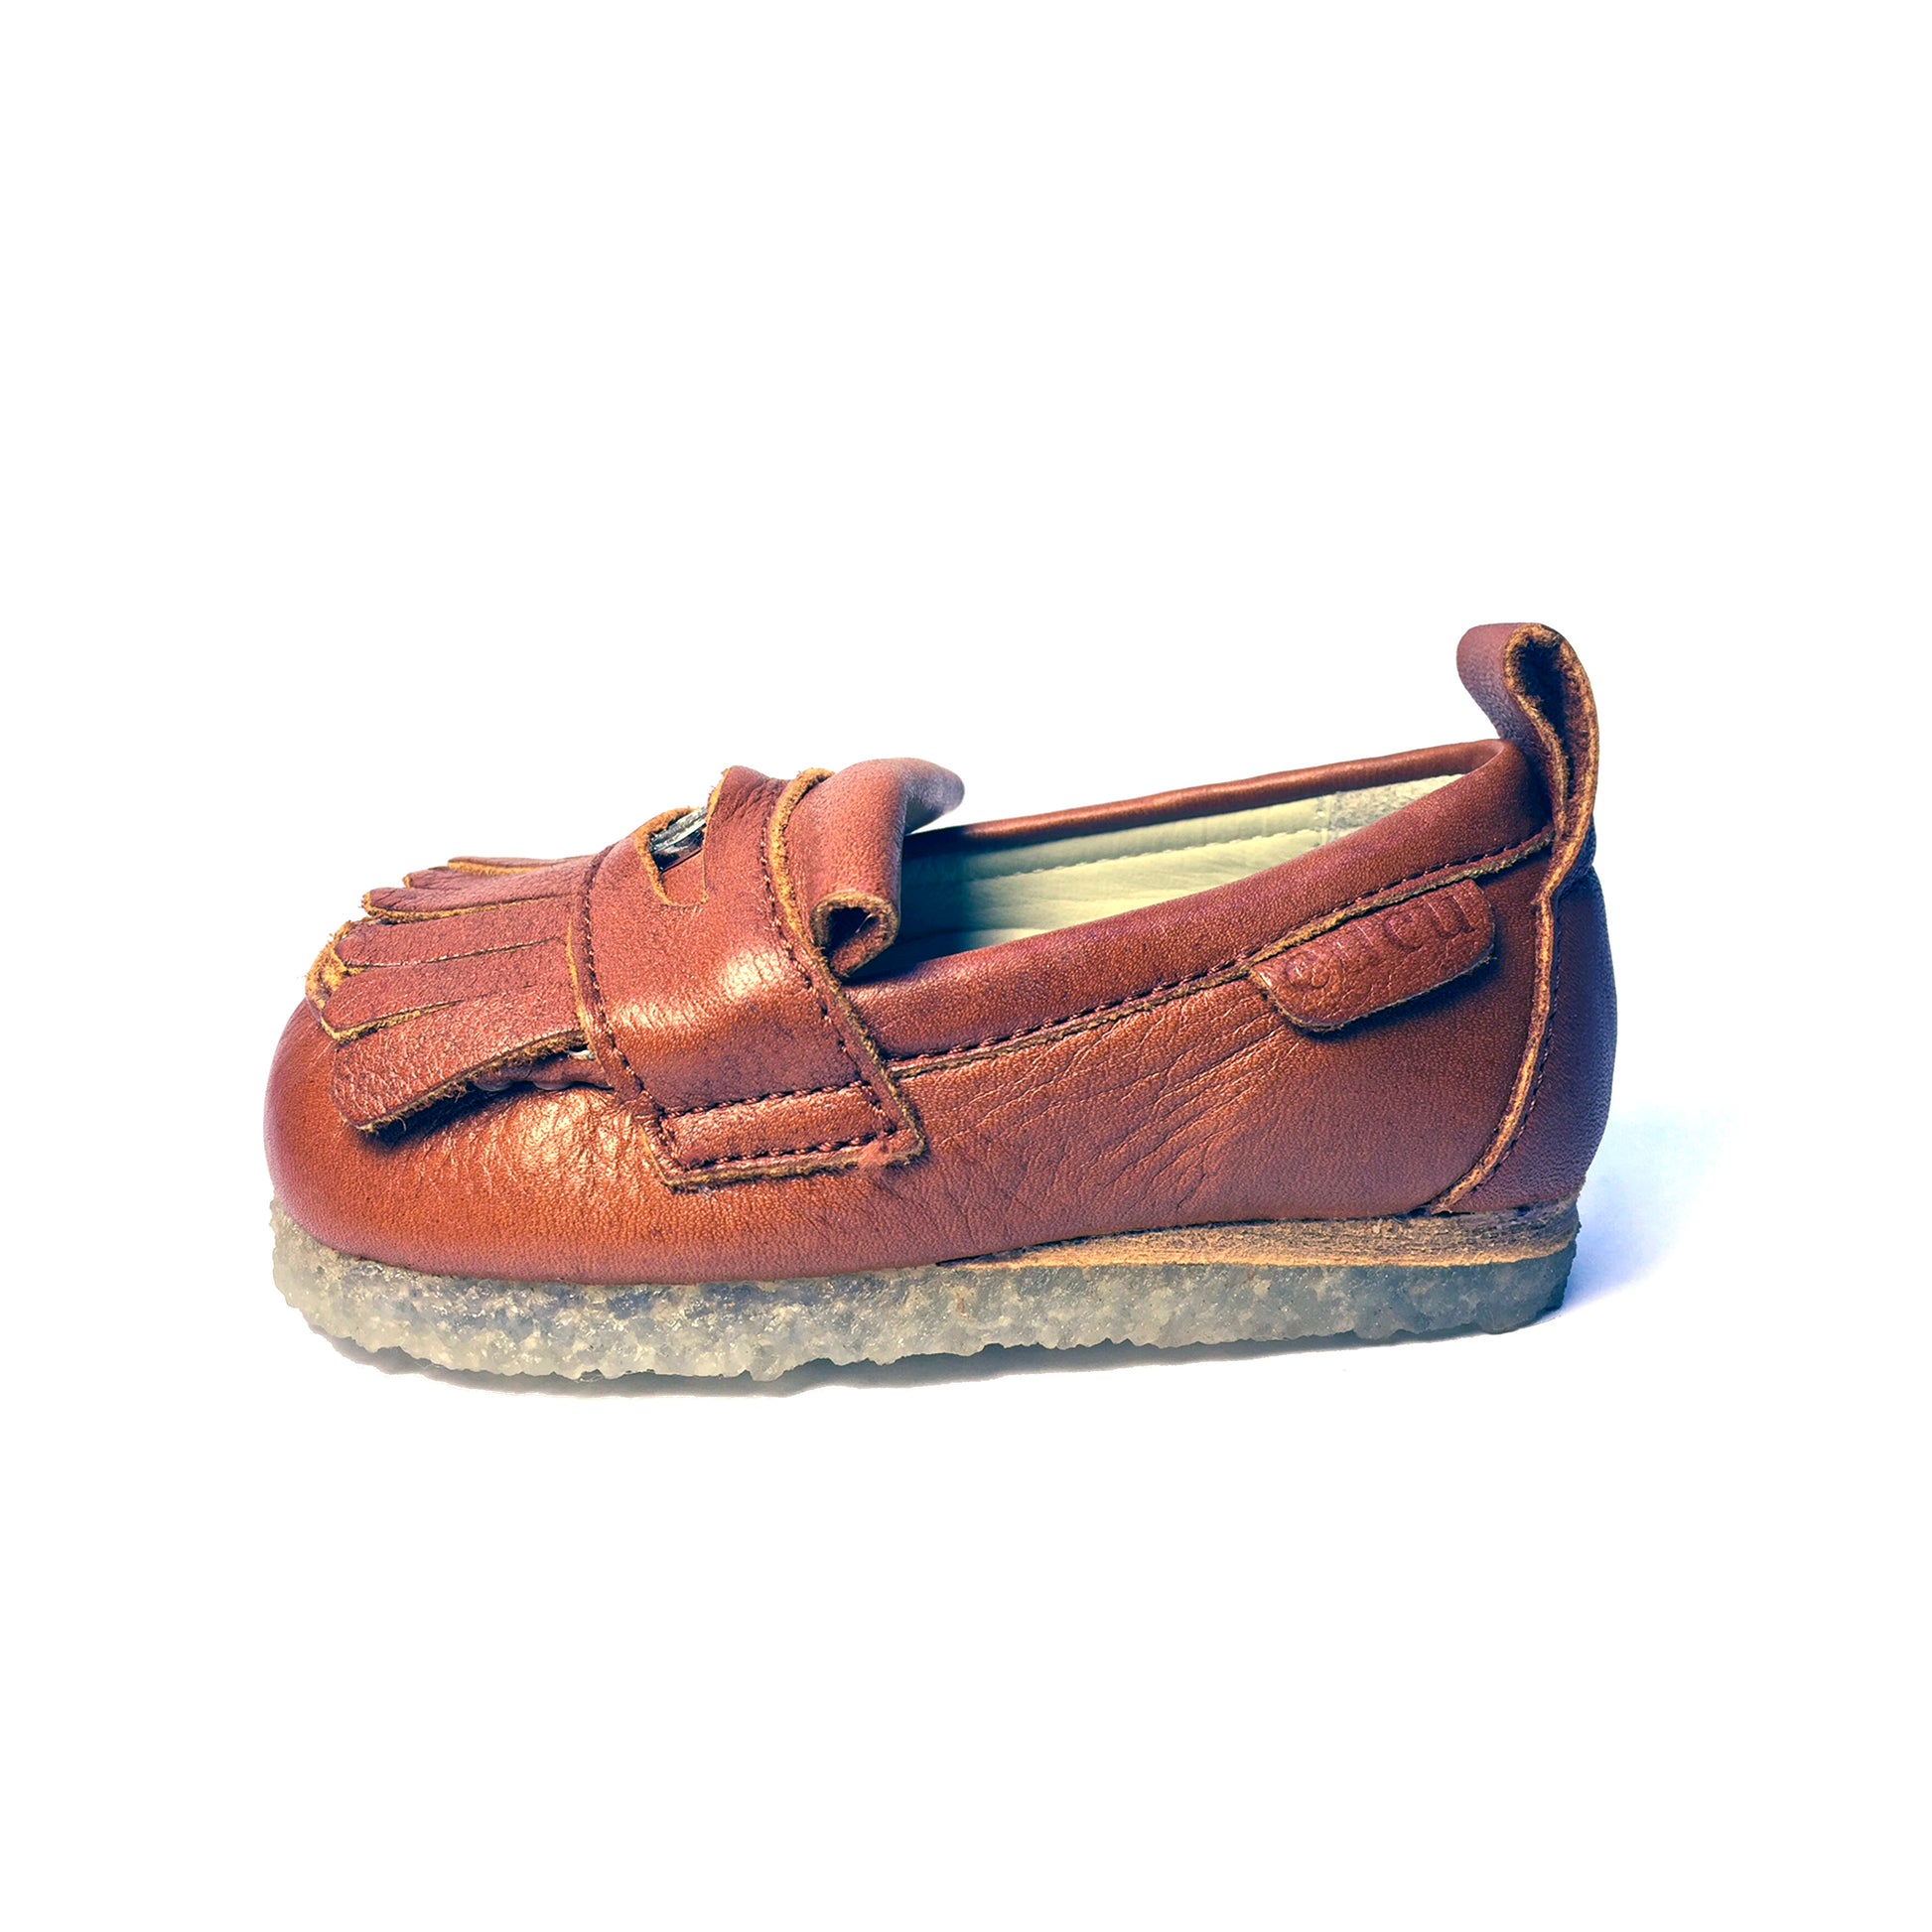 Peso Loafer Kids Shoes - Daddy's Briefcase